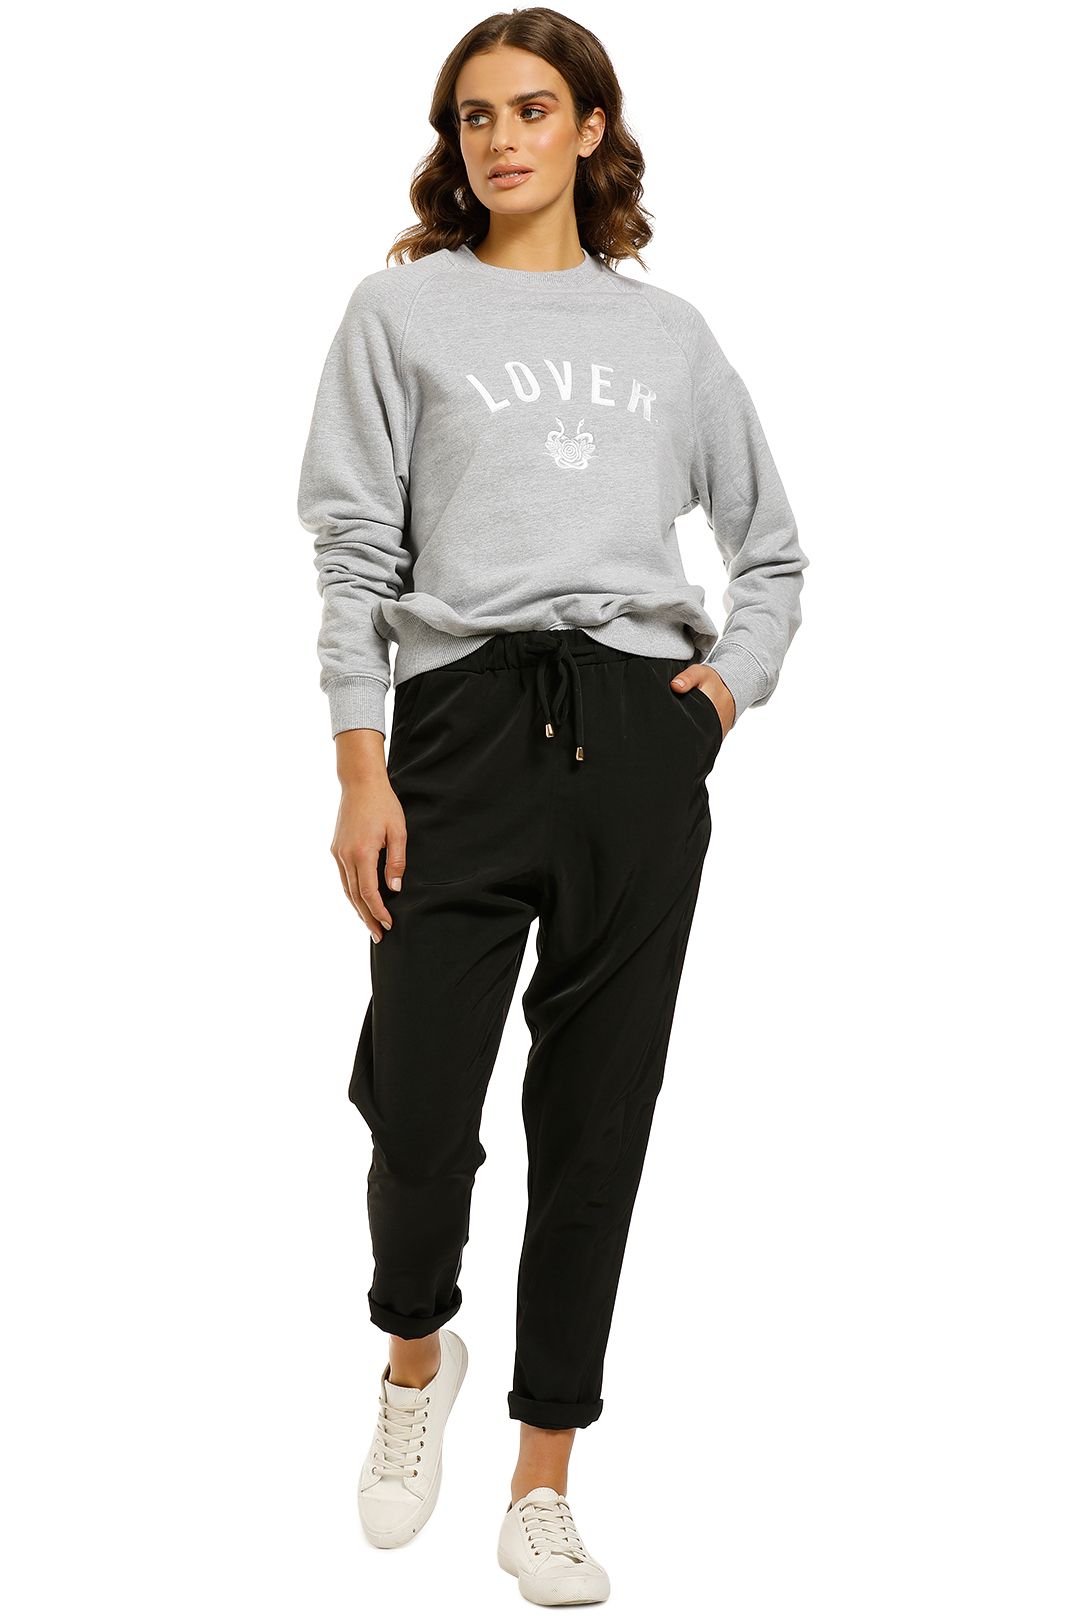 Lover-Embroidered-Sweat-Grey-Front